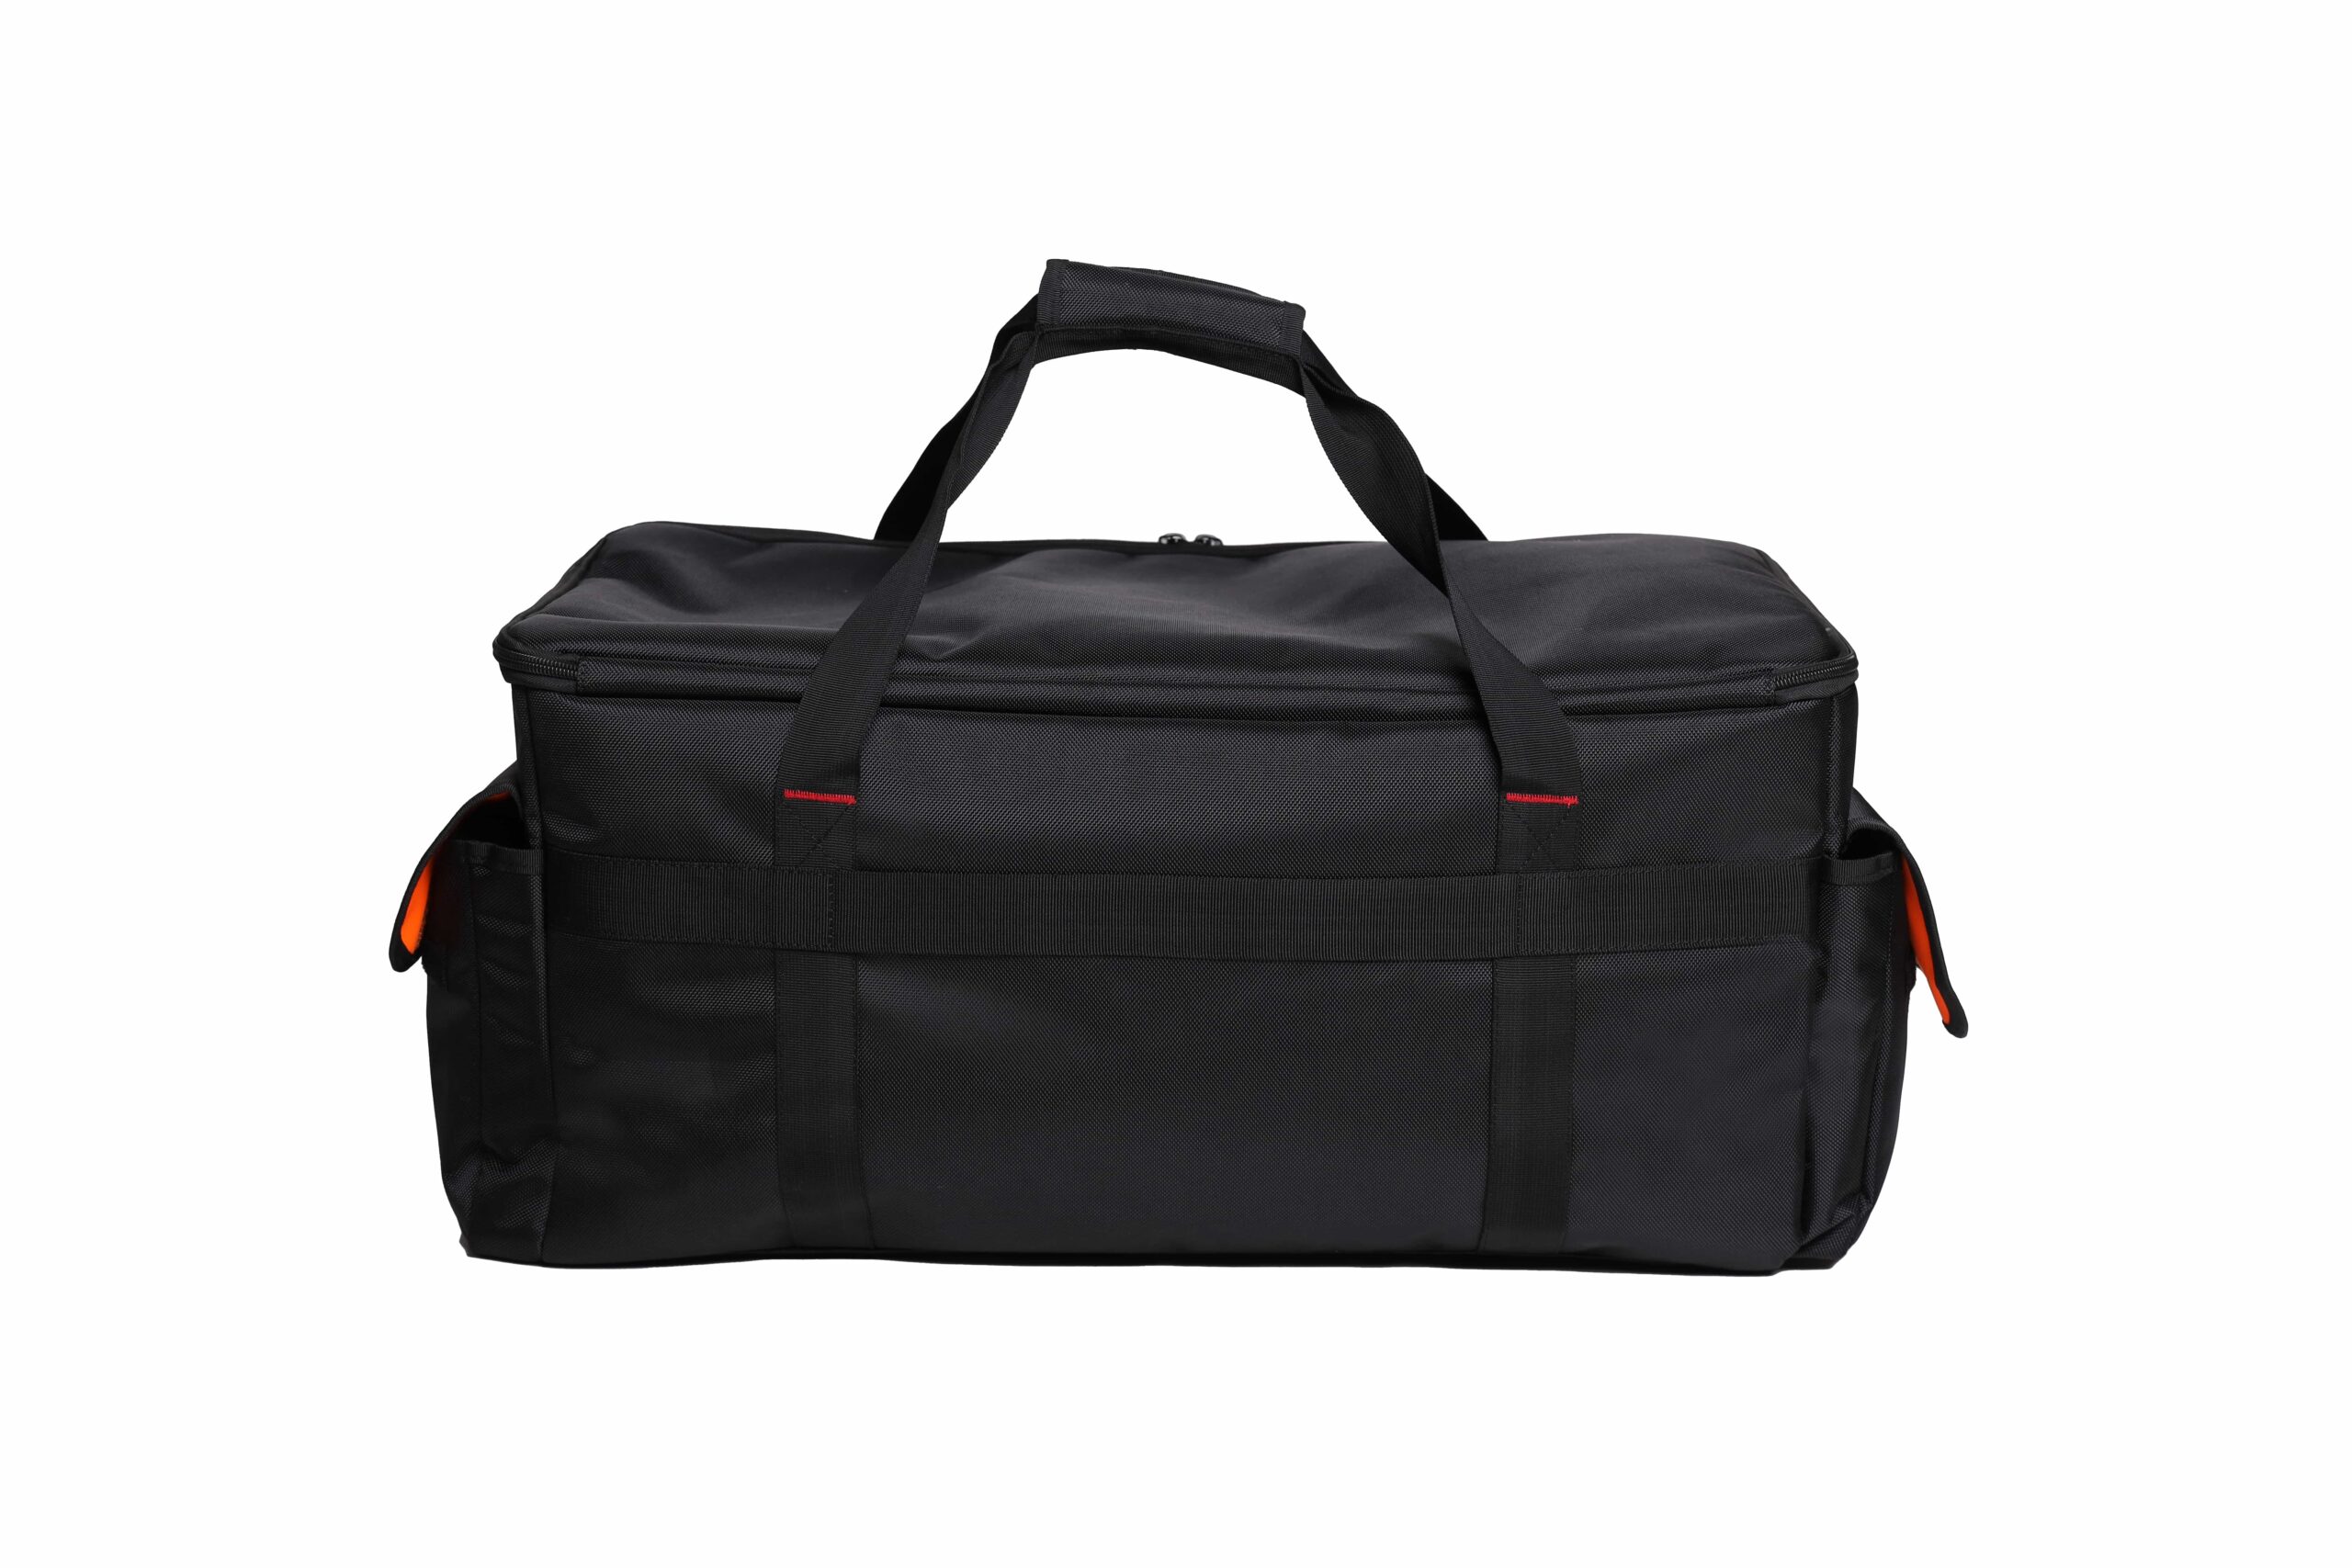 Gator Cases LG Cable & Accessory Organization Bag-G-CABLEBAG-LG